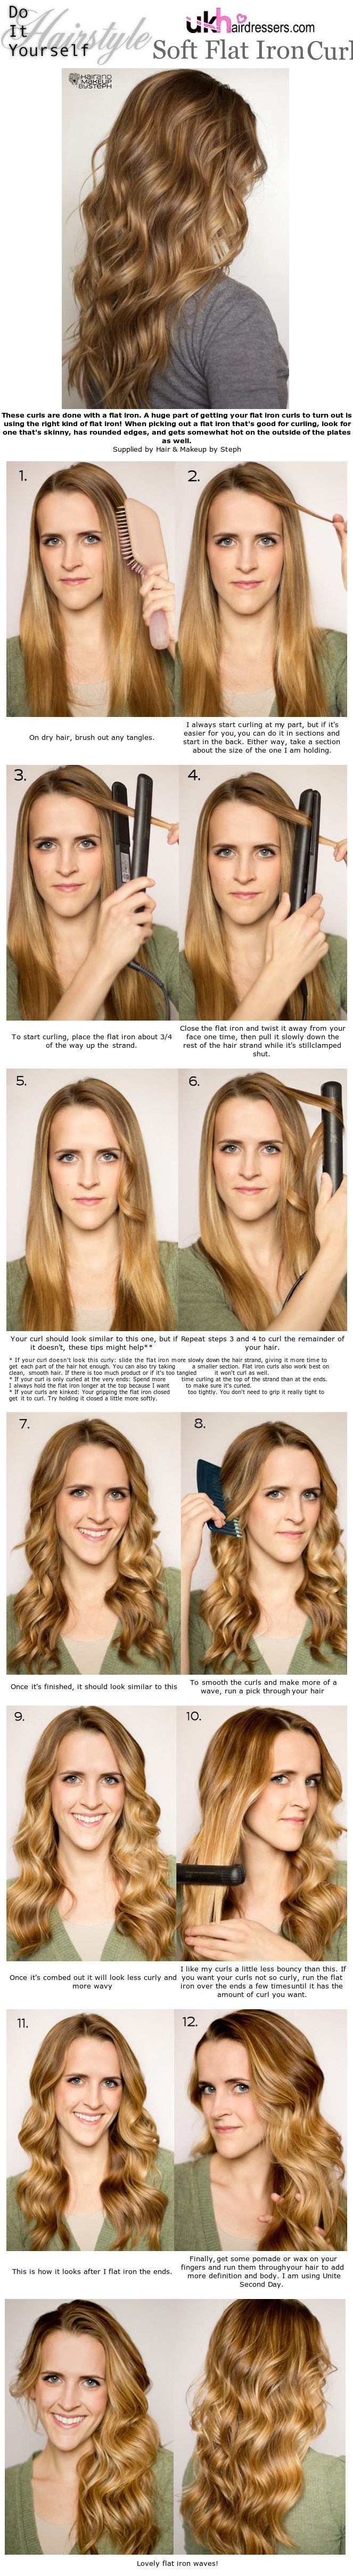 15 Super Easy Hairstyles For Lazy Girls With Tutorials